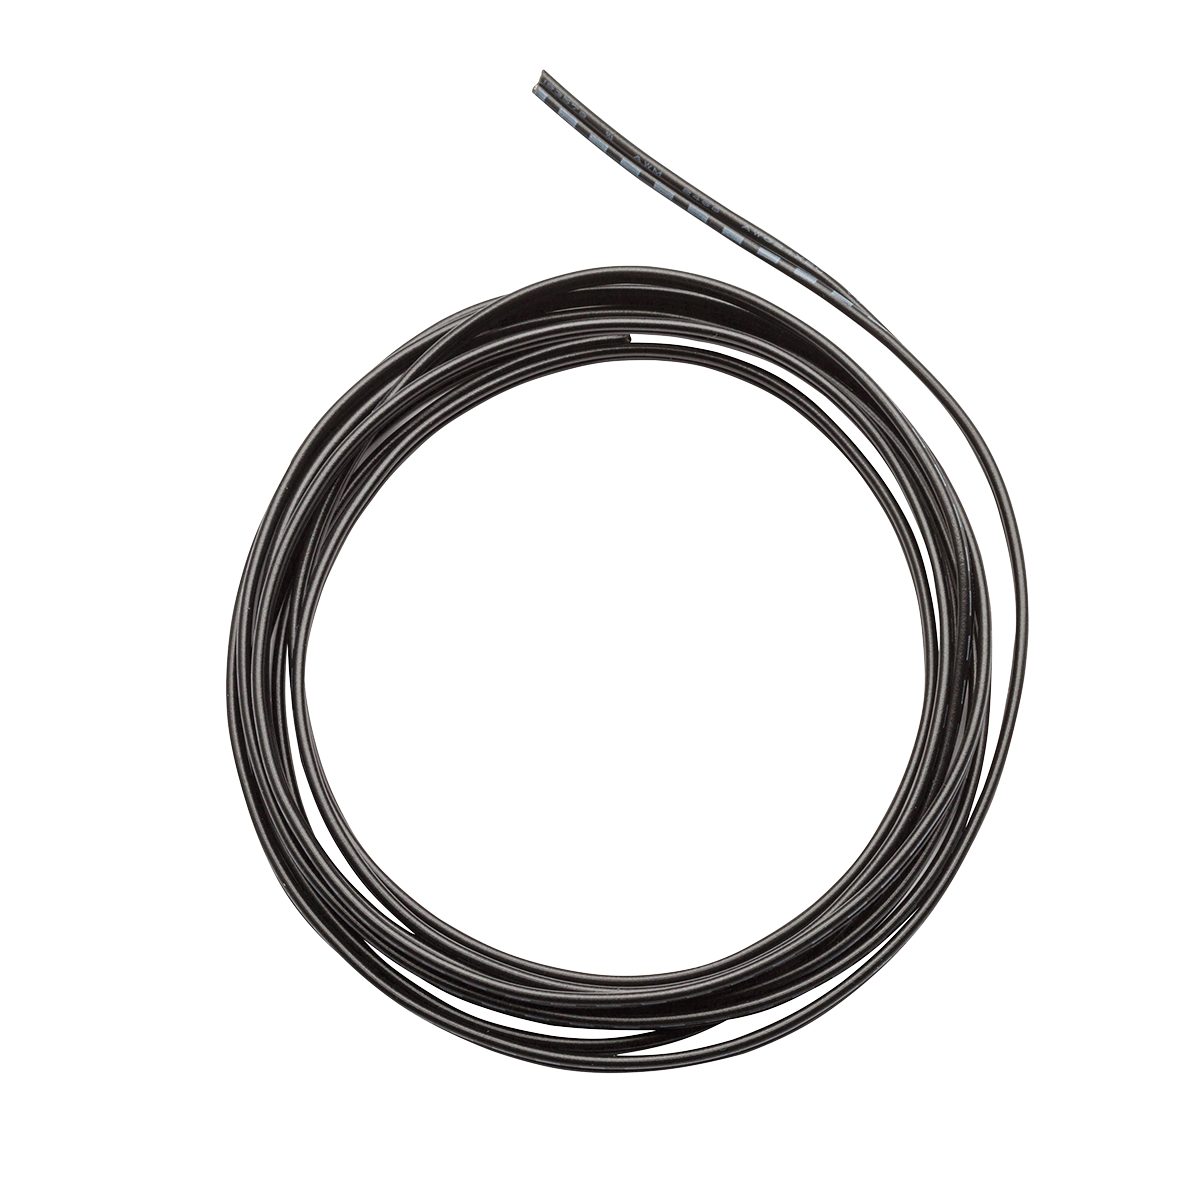 The Class 2-rated 24 AWG wire is ideal for low voltage lighting system applications that do not require installation behind walls.